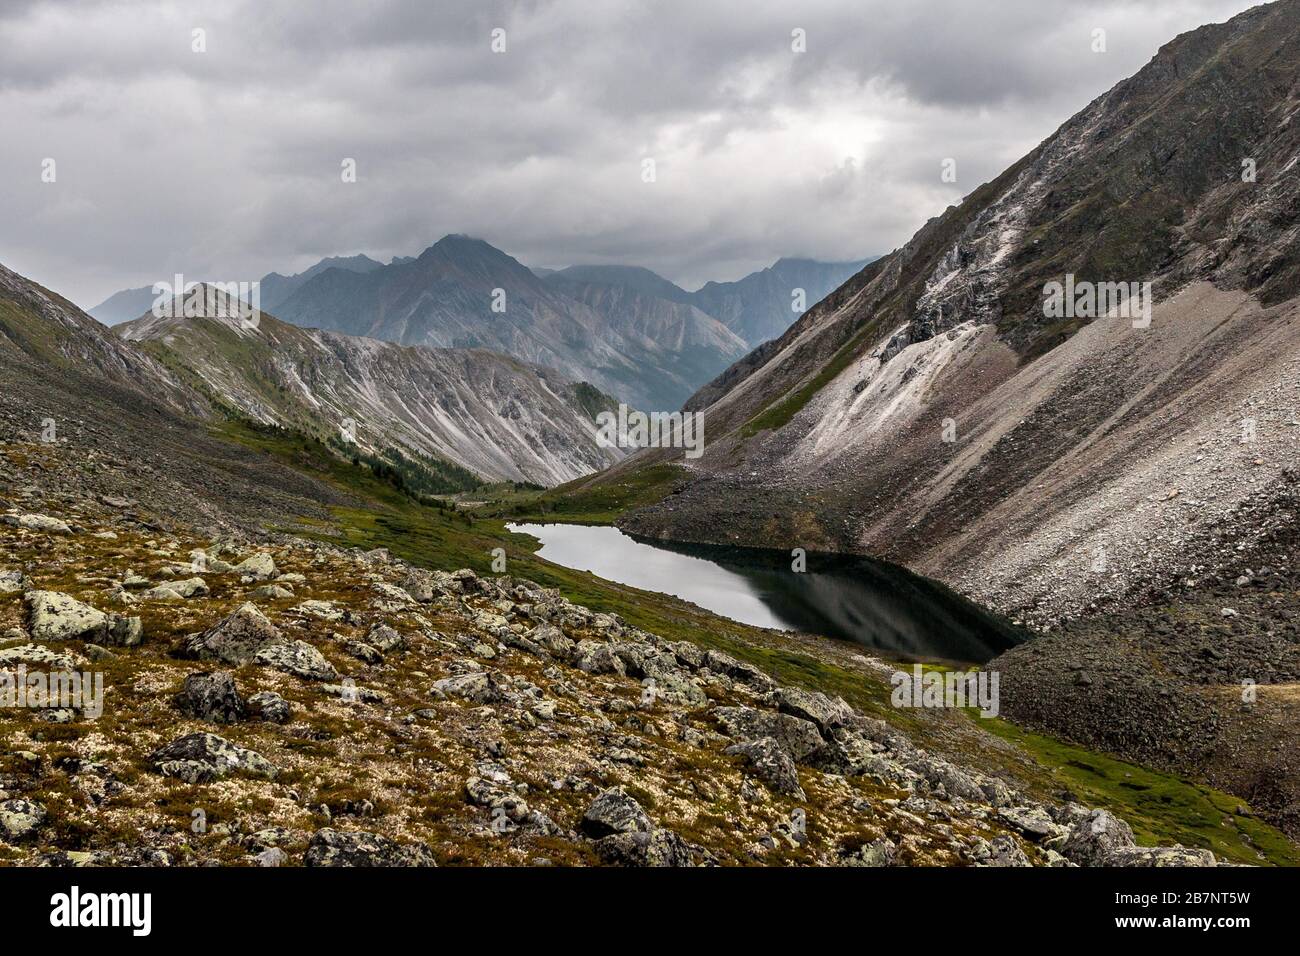 Mountain lake with a rocky slope in the foreground and mountain ranges in the background. Moss on the stones. Clouds in the sky. Horizontal. Stock Photo